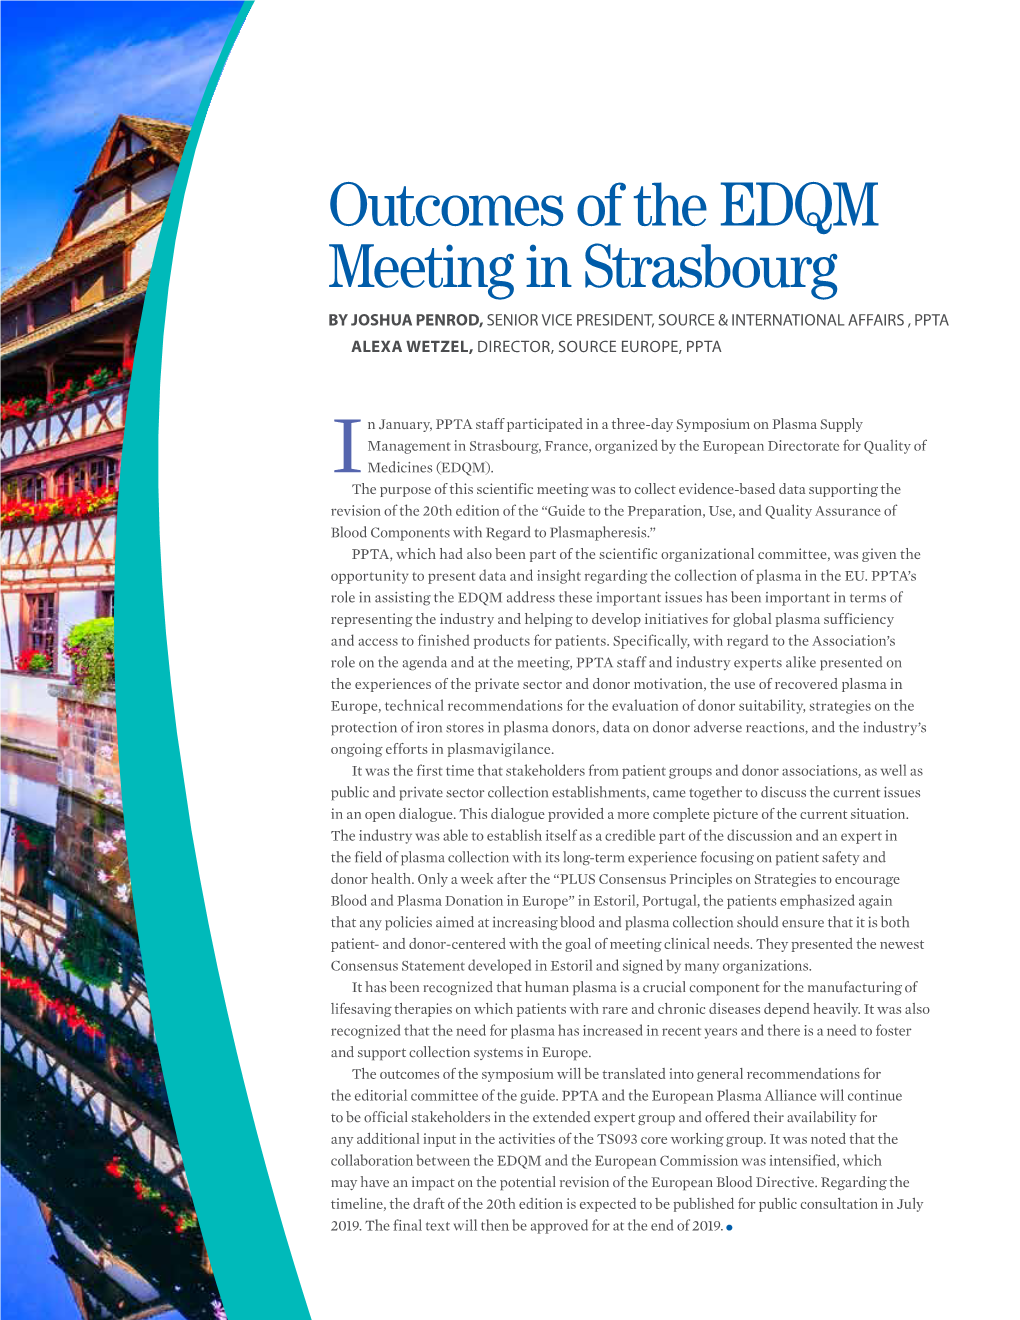 Outcomes of the EDQM Meeting in Strasbourg